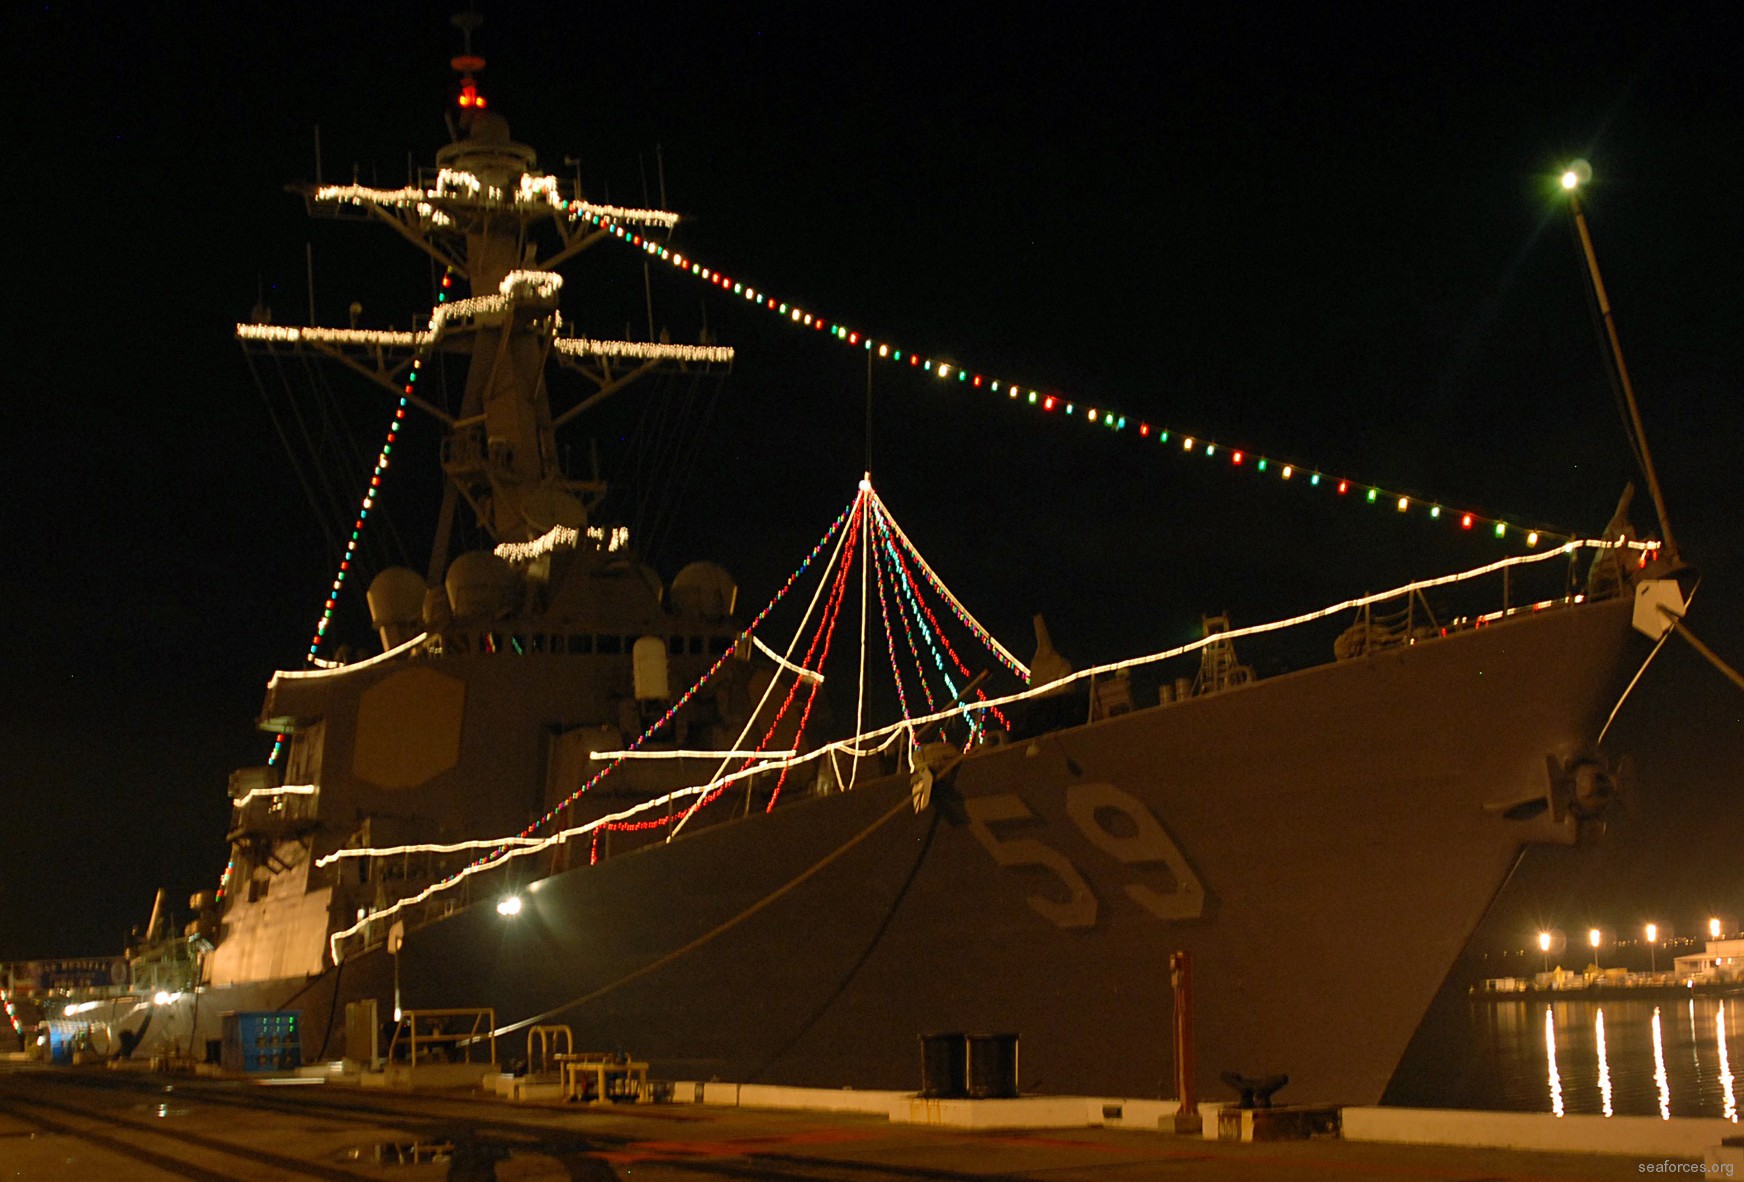 ddg-59 uss russell guided missile destroyer us navy 18